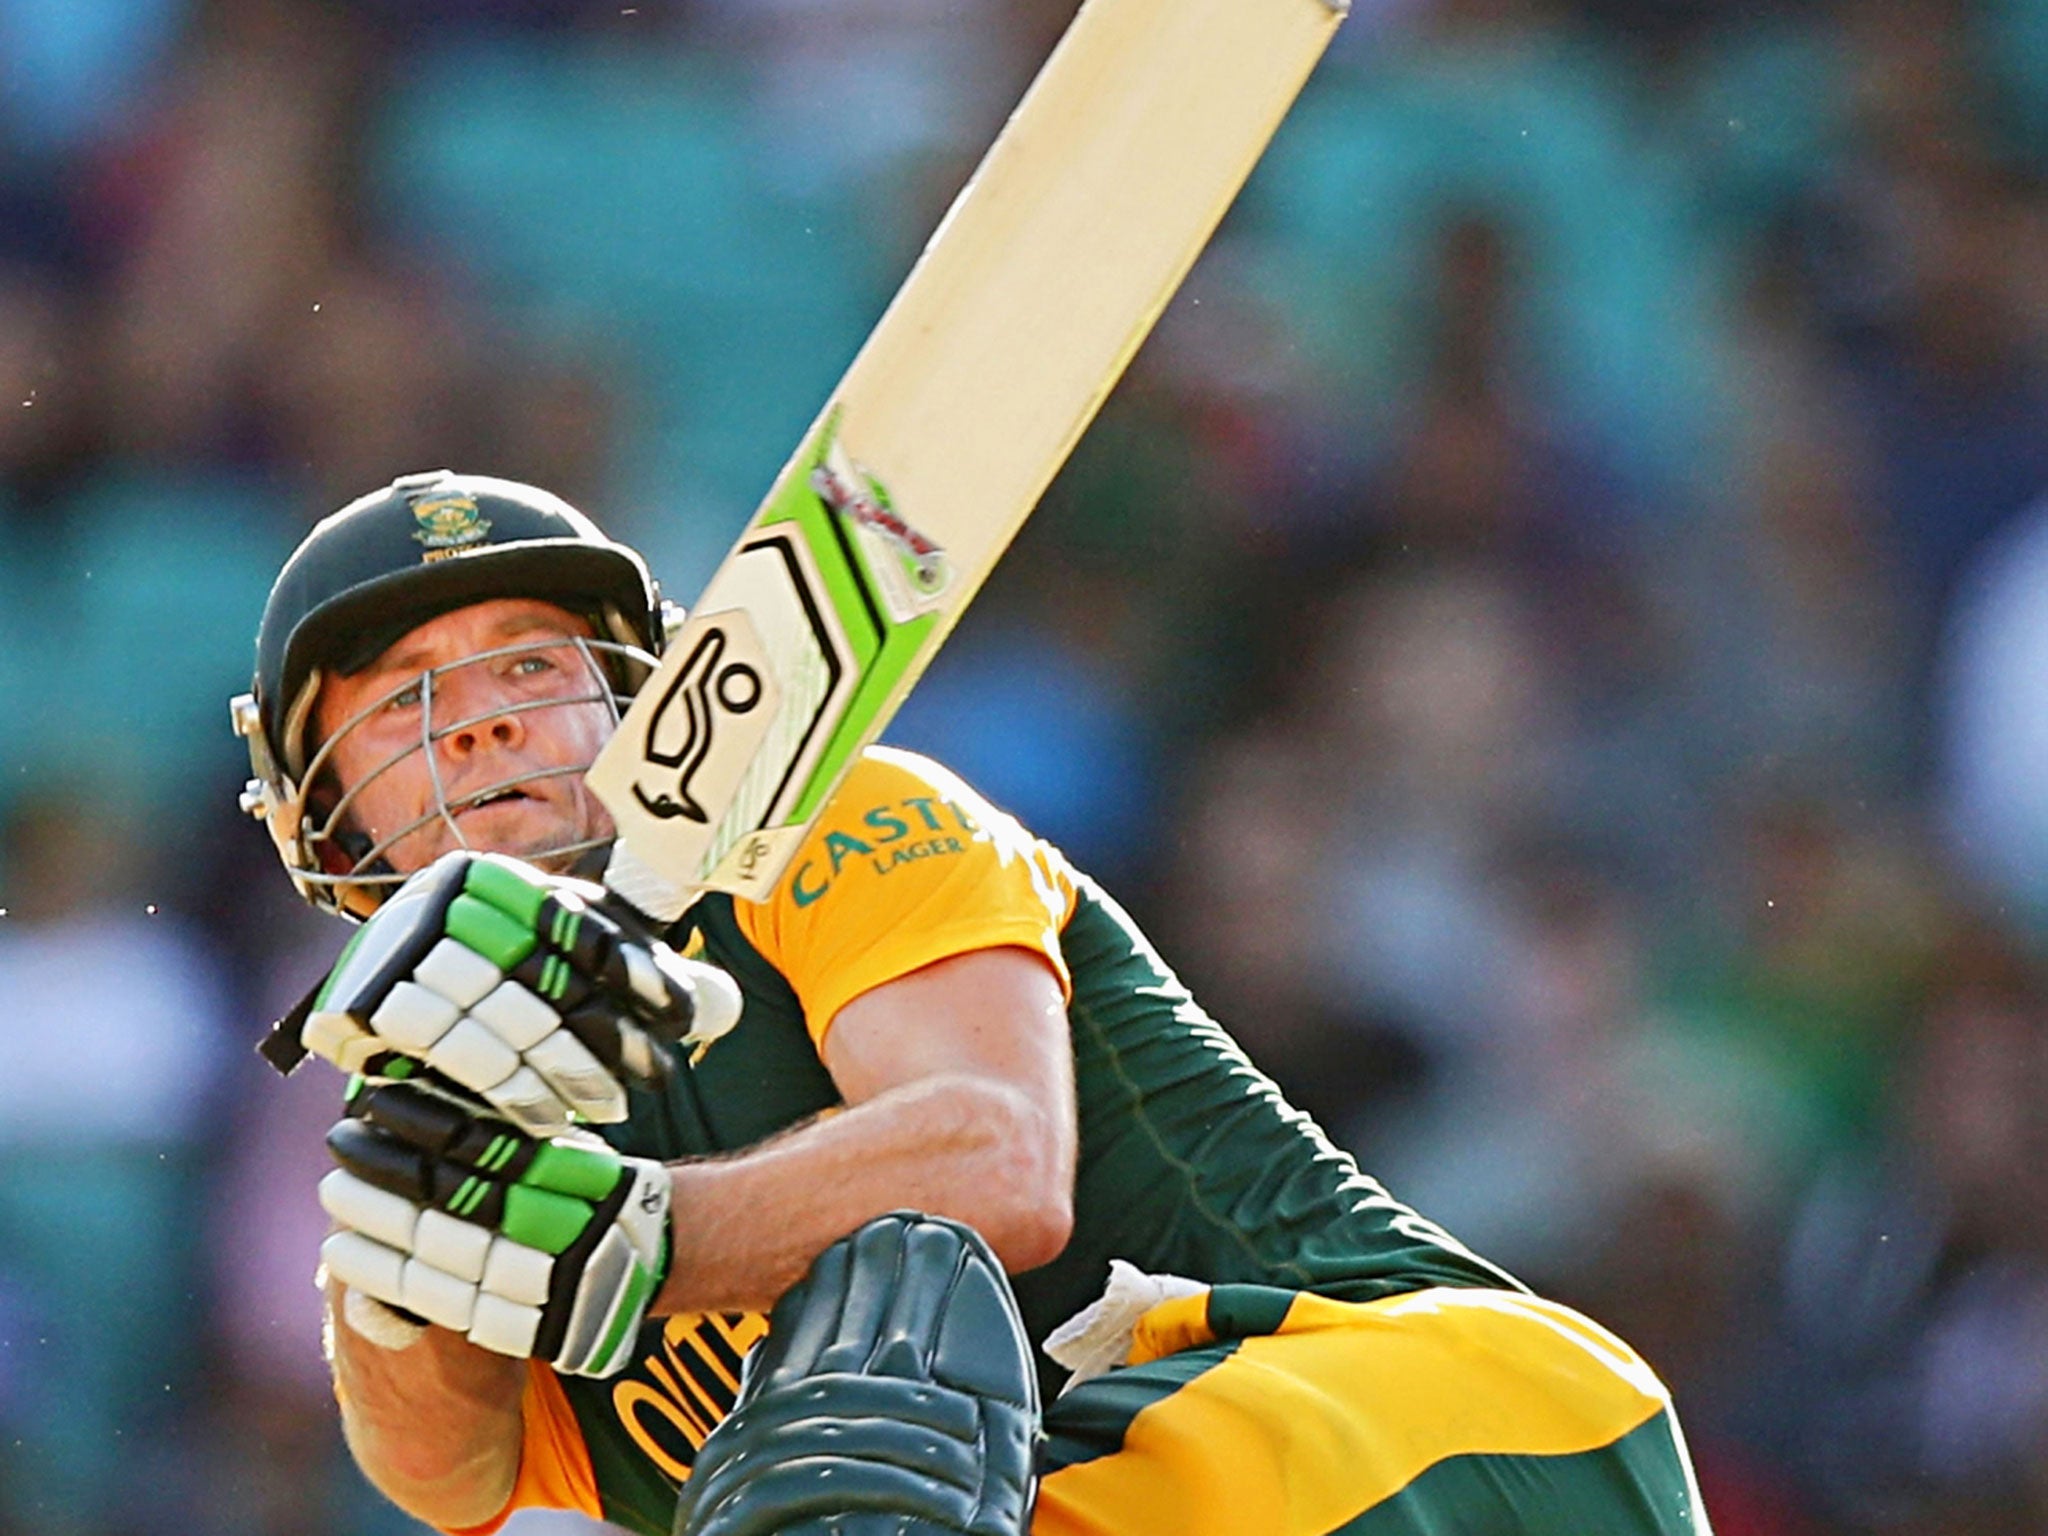 AB de Villiers of South Africa bats during the 2015 ICC Cricket World Cup match between South Africa and the West Indies on Friday